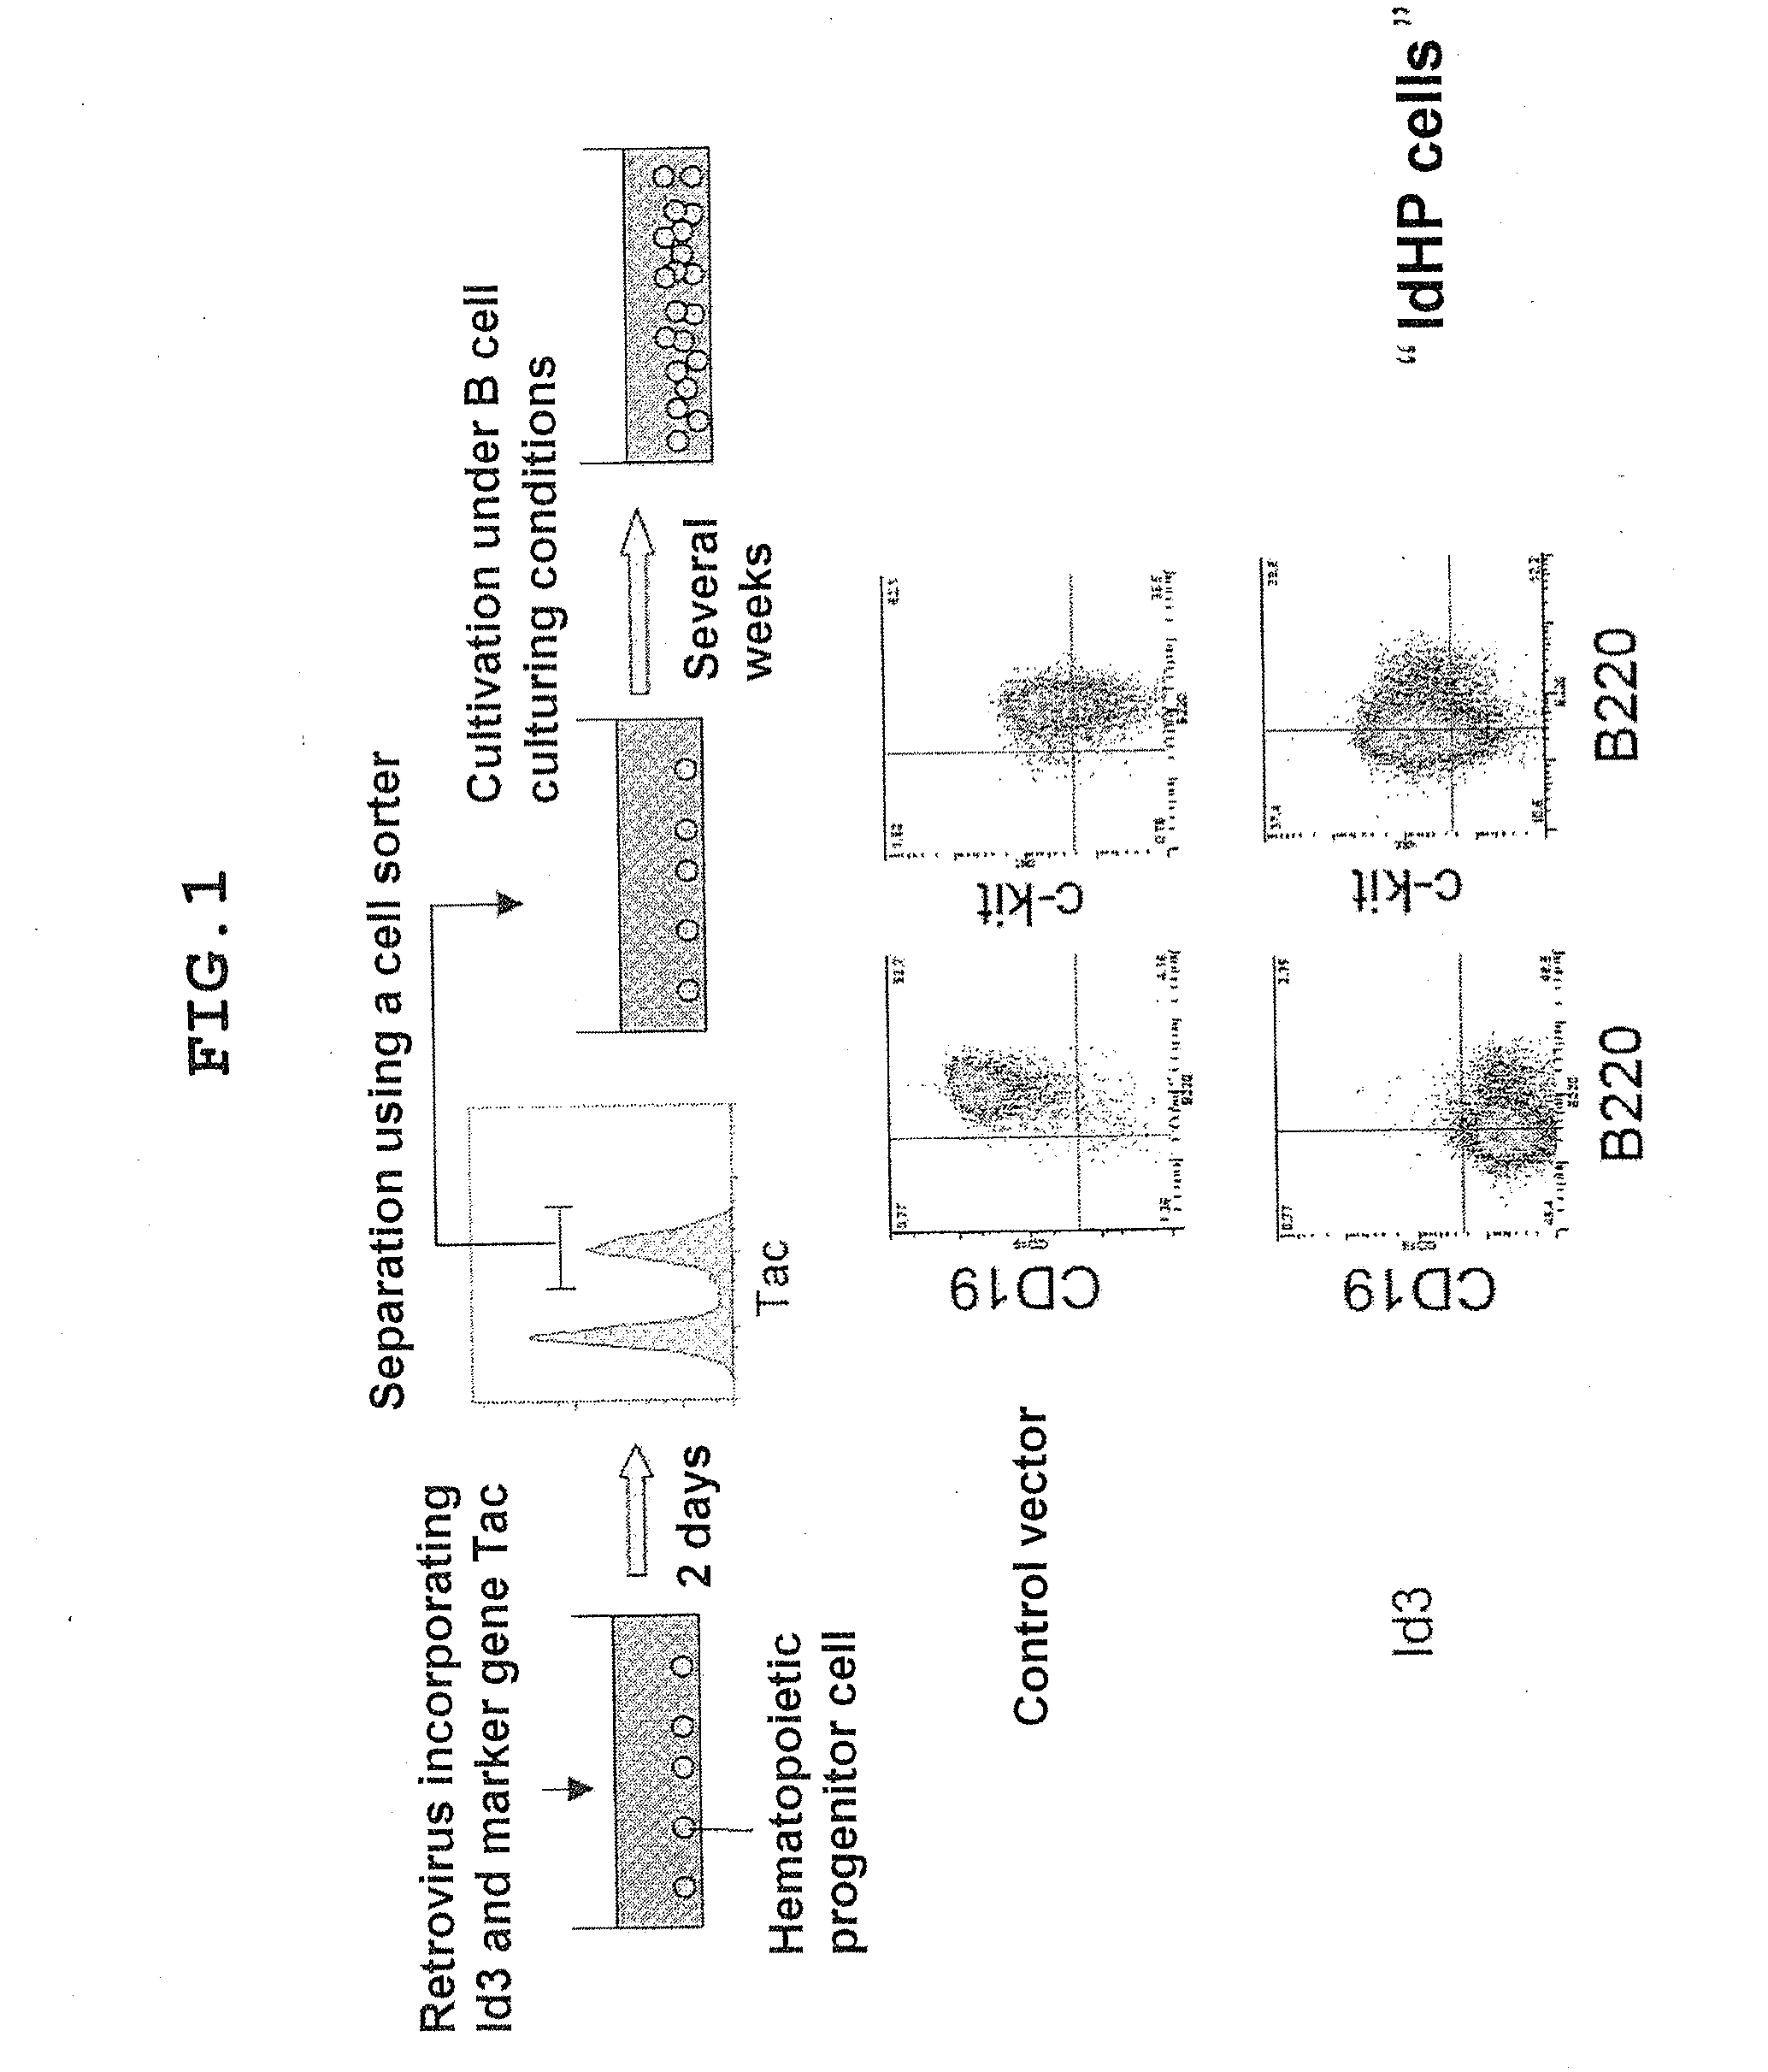 Method for producing cells having characteristic of hematopoietic stem cells/progenitor cells